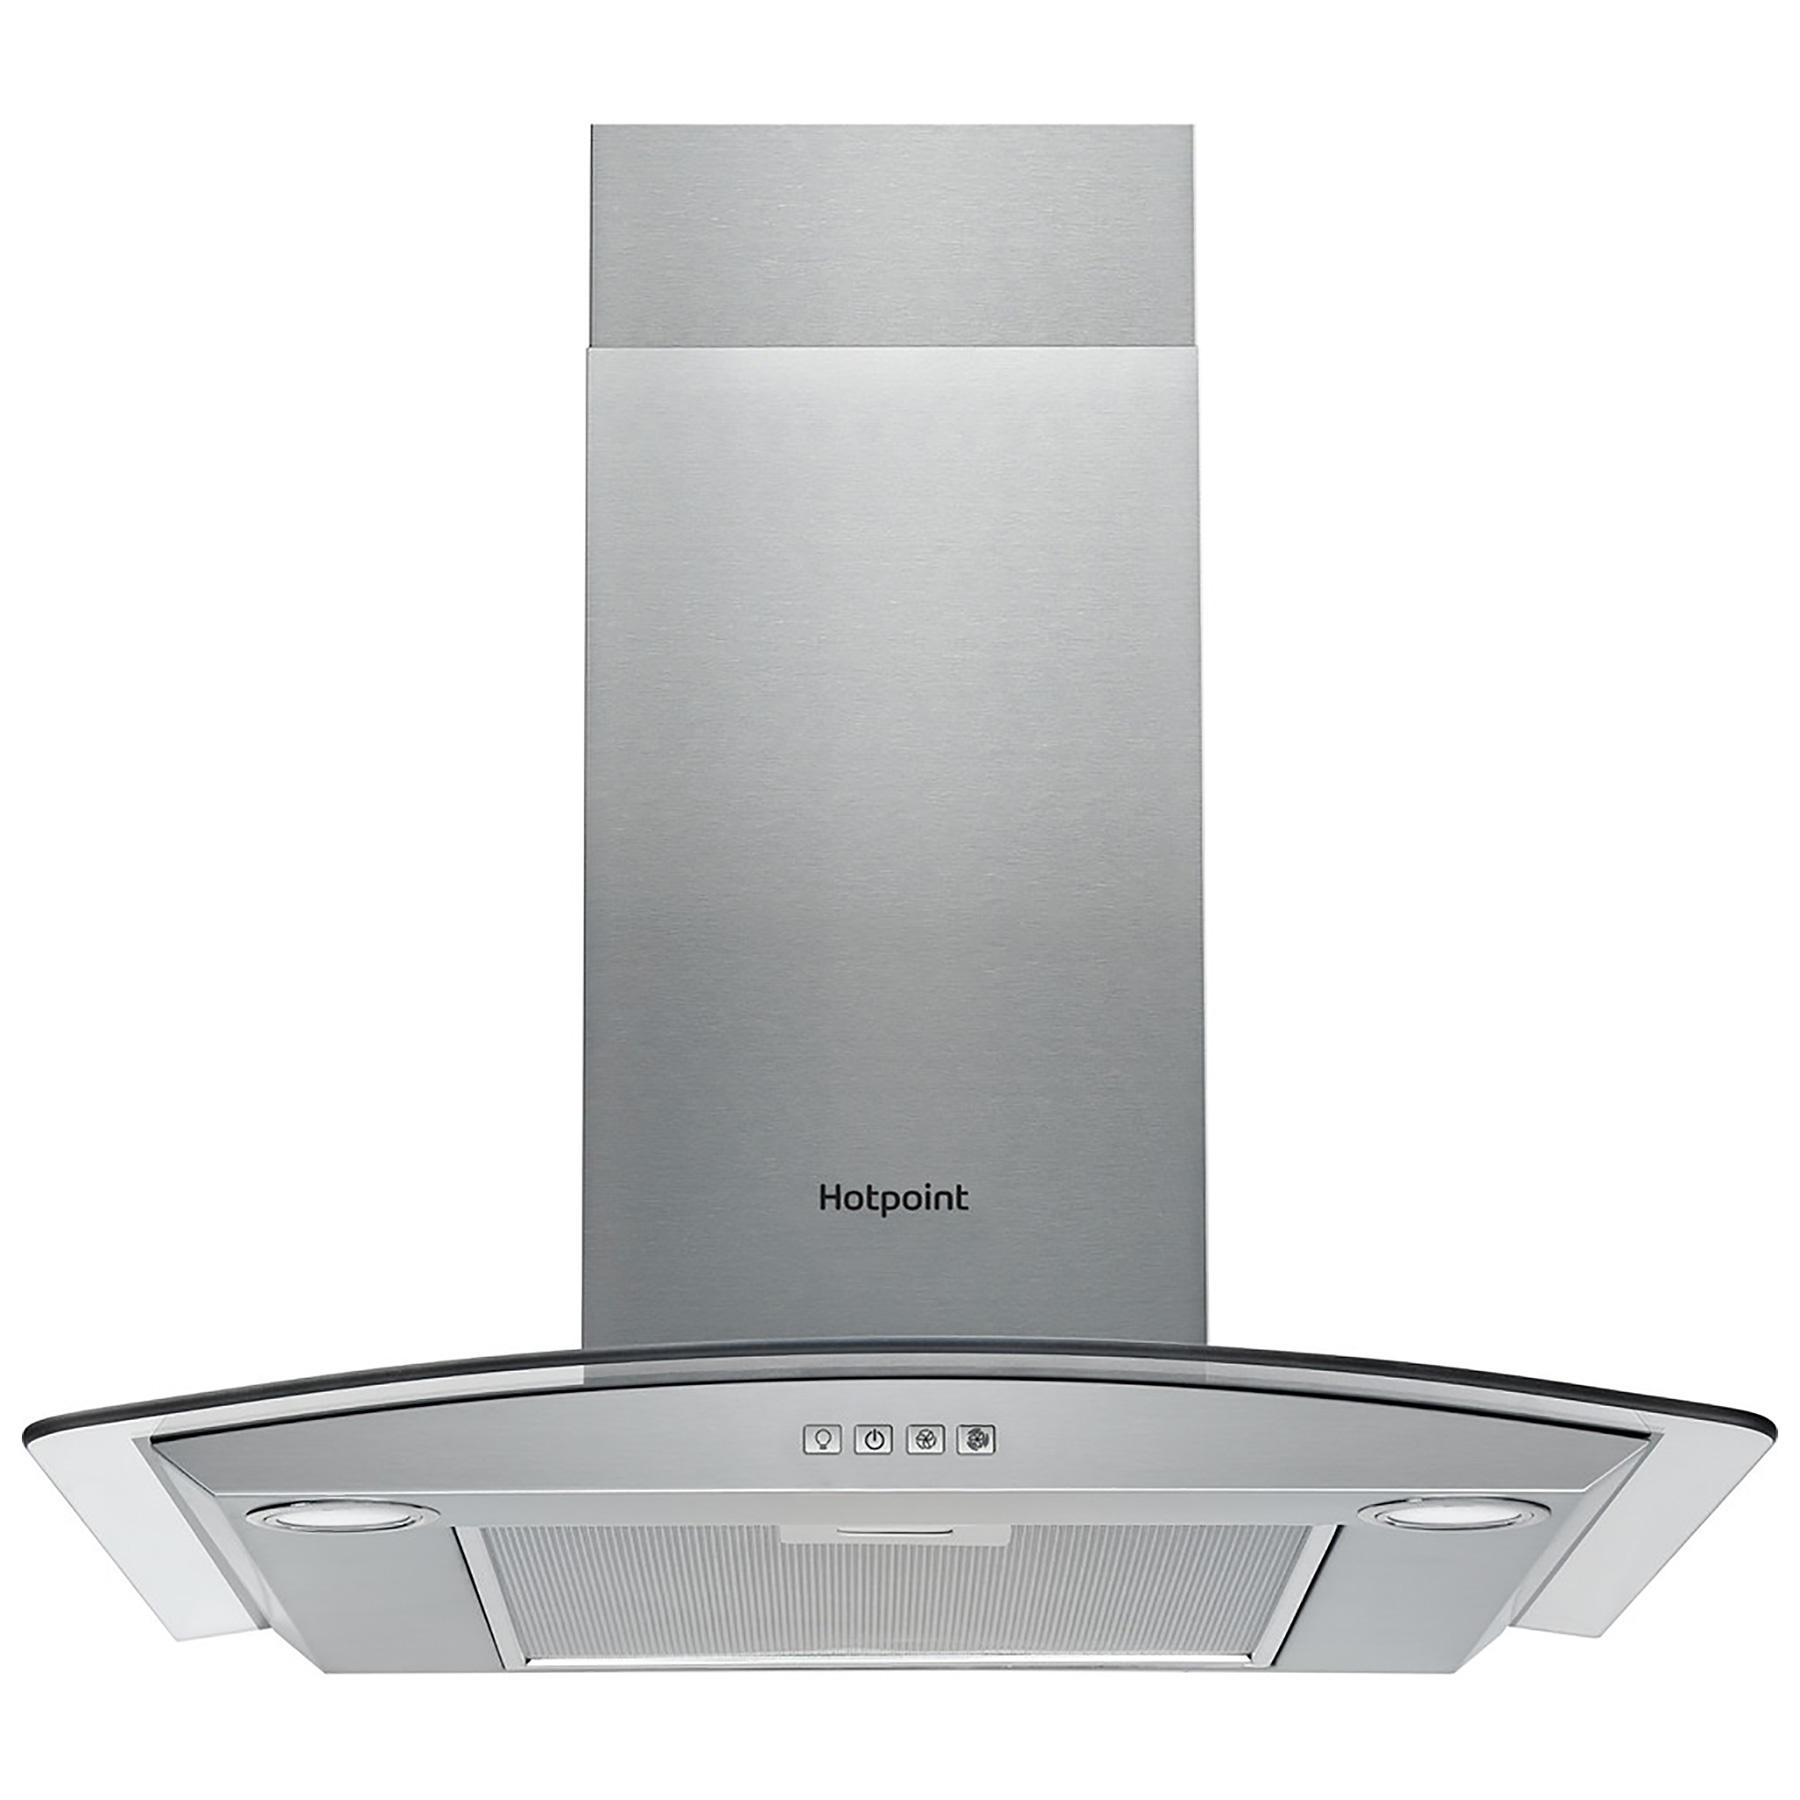 Image of Hotpoint PHGC74FLMX 70cm Curved Chimney Hood in Stainless Steel